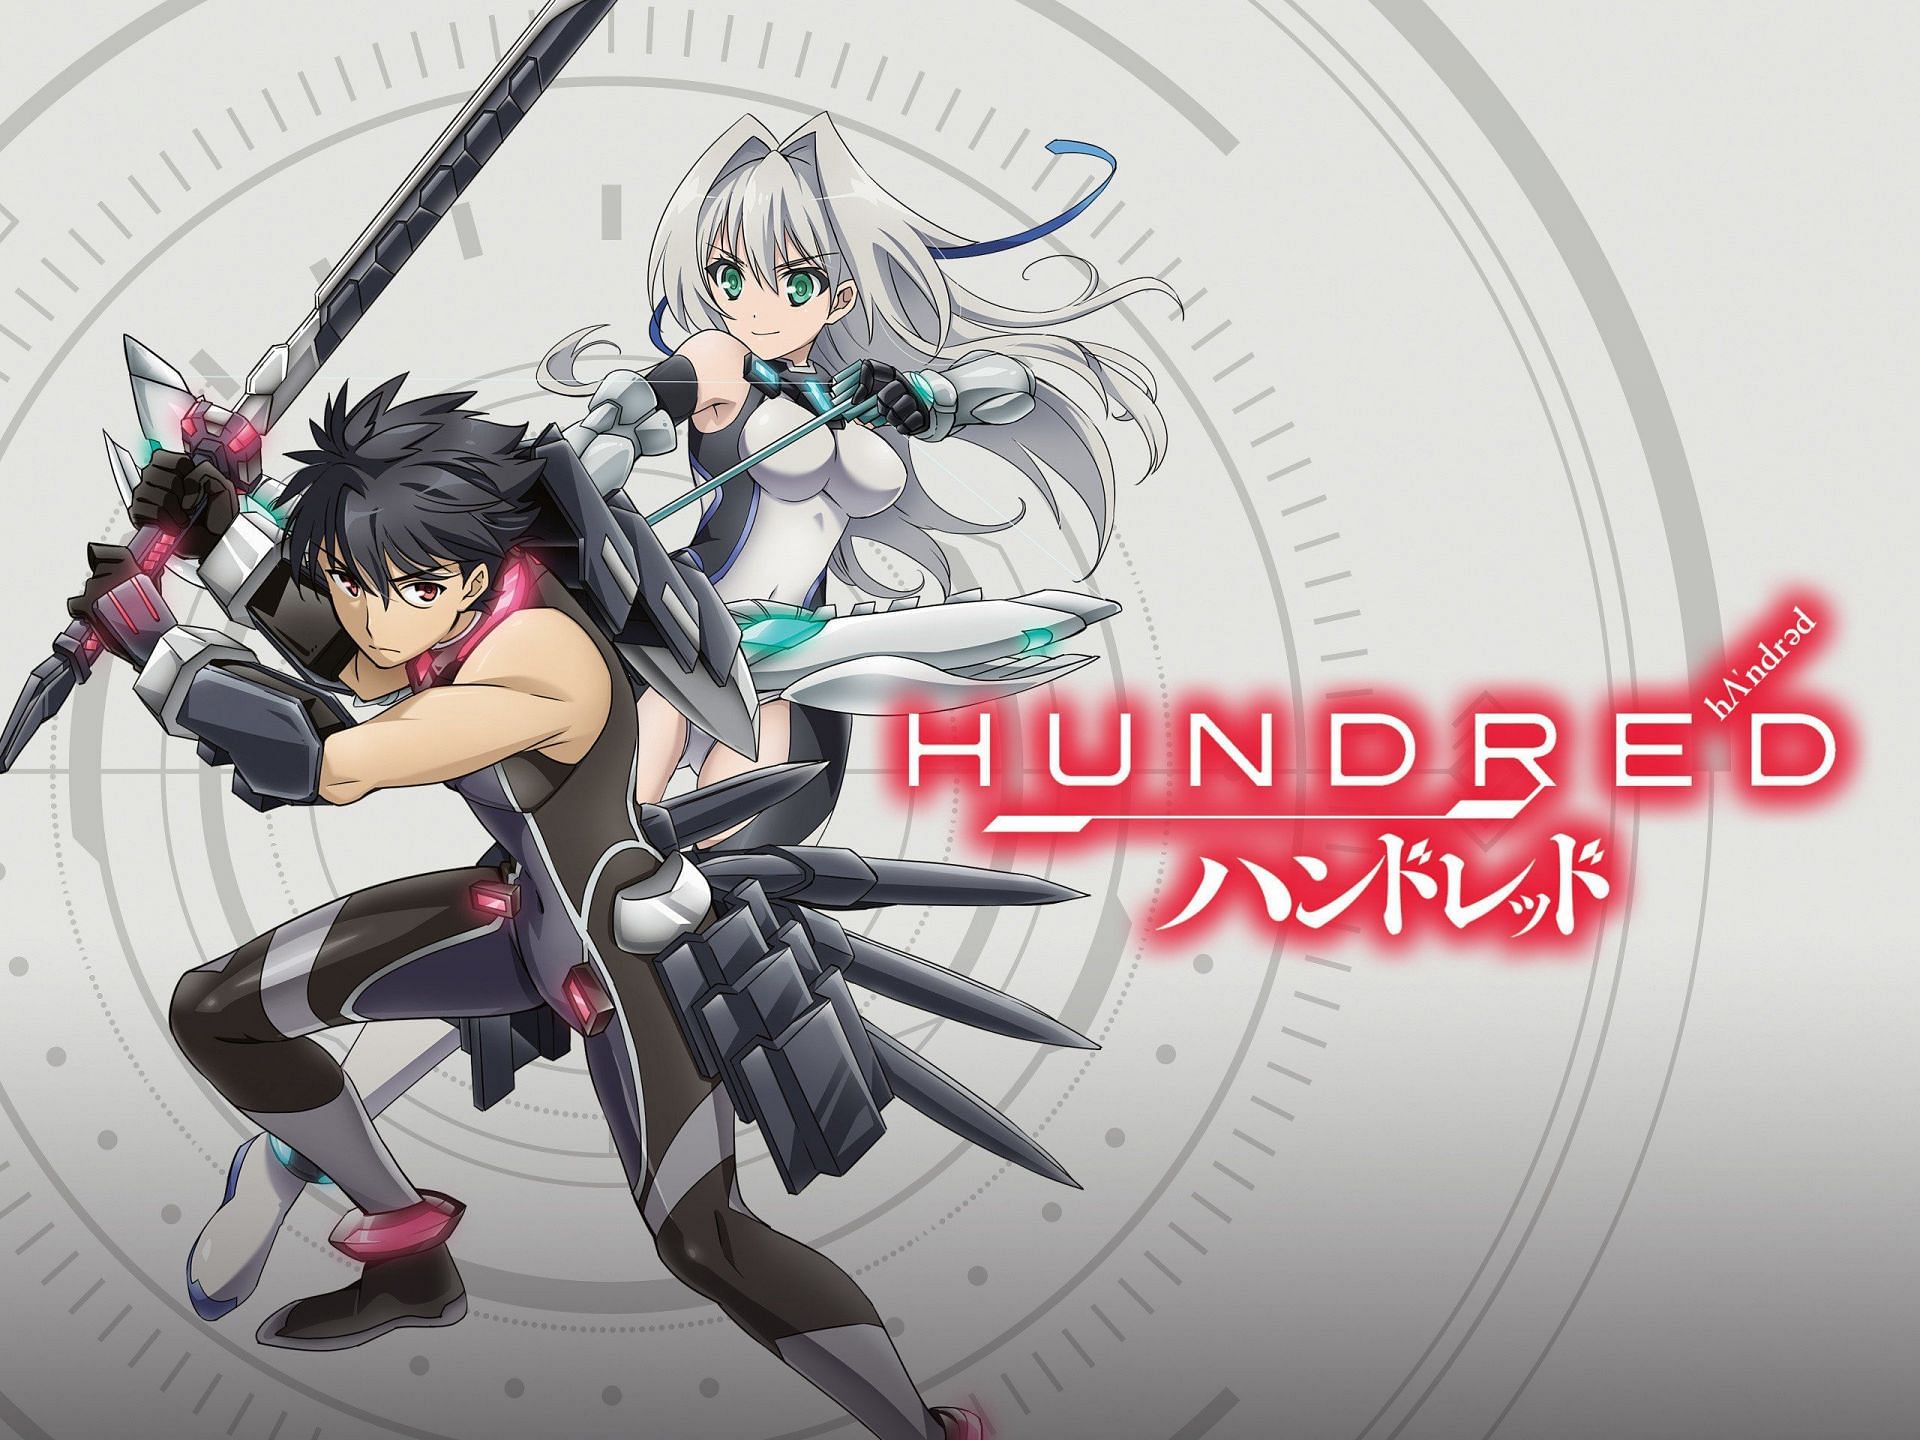 Official &#039;Hundred&#039; art featuring the two main characters (Image via Hundred, Avex Pictures, Production IMS)